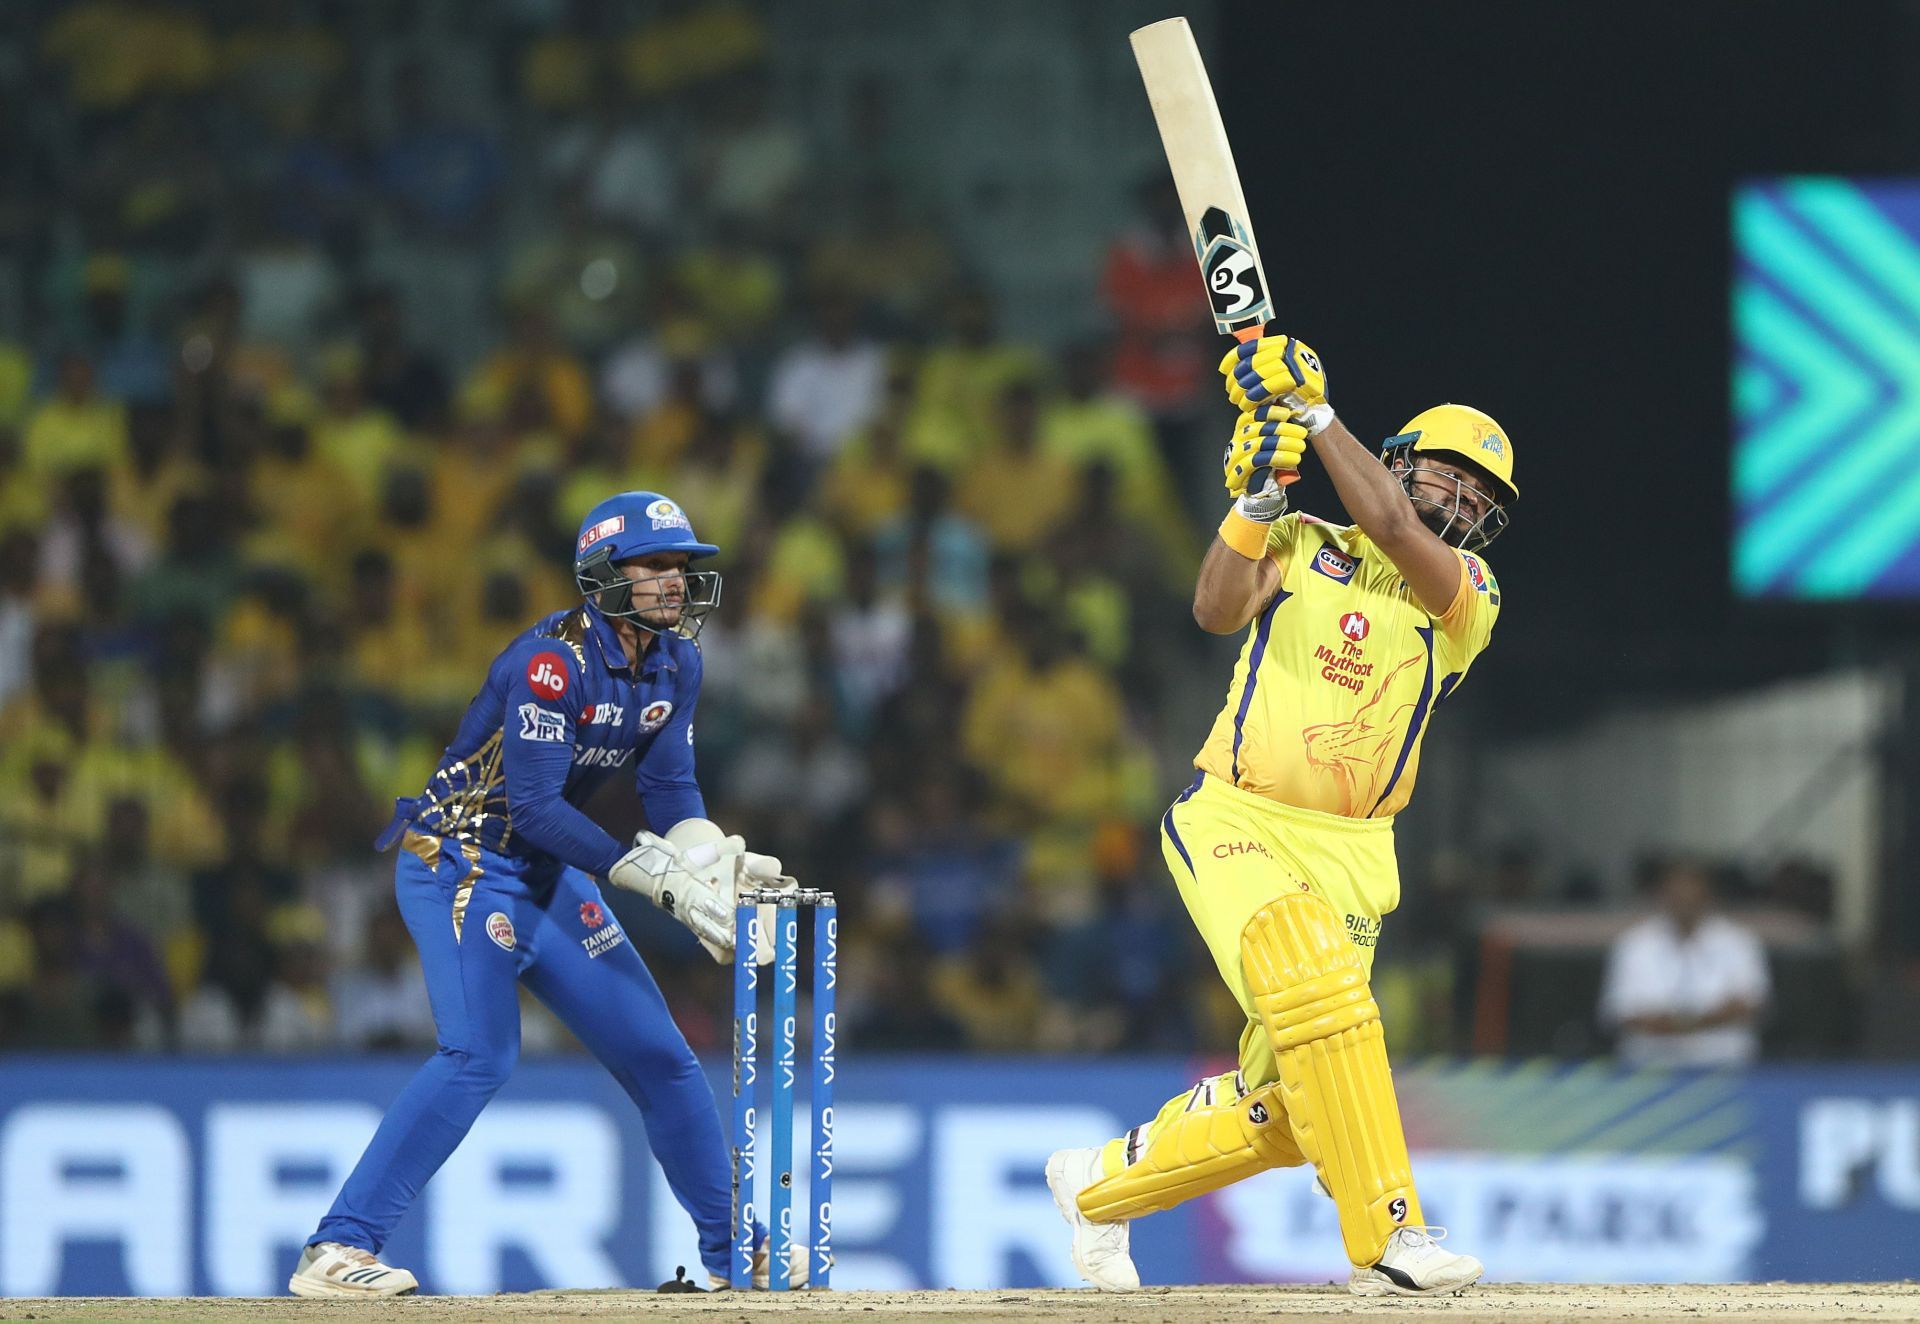 Suresh Raina is fondly called &#039;Mr. IPL&#039; because of his extraordinary exploits in the league.